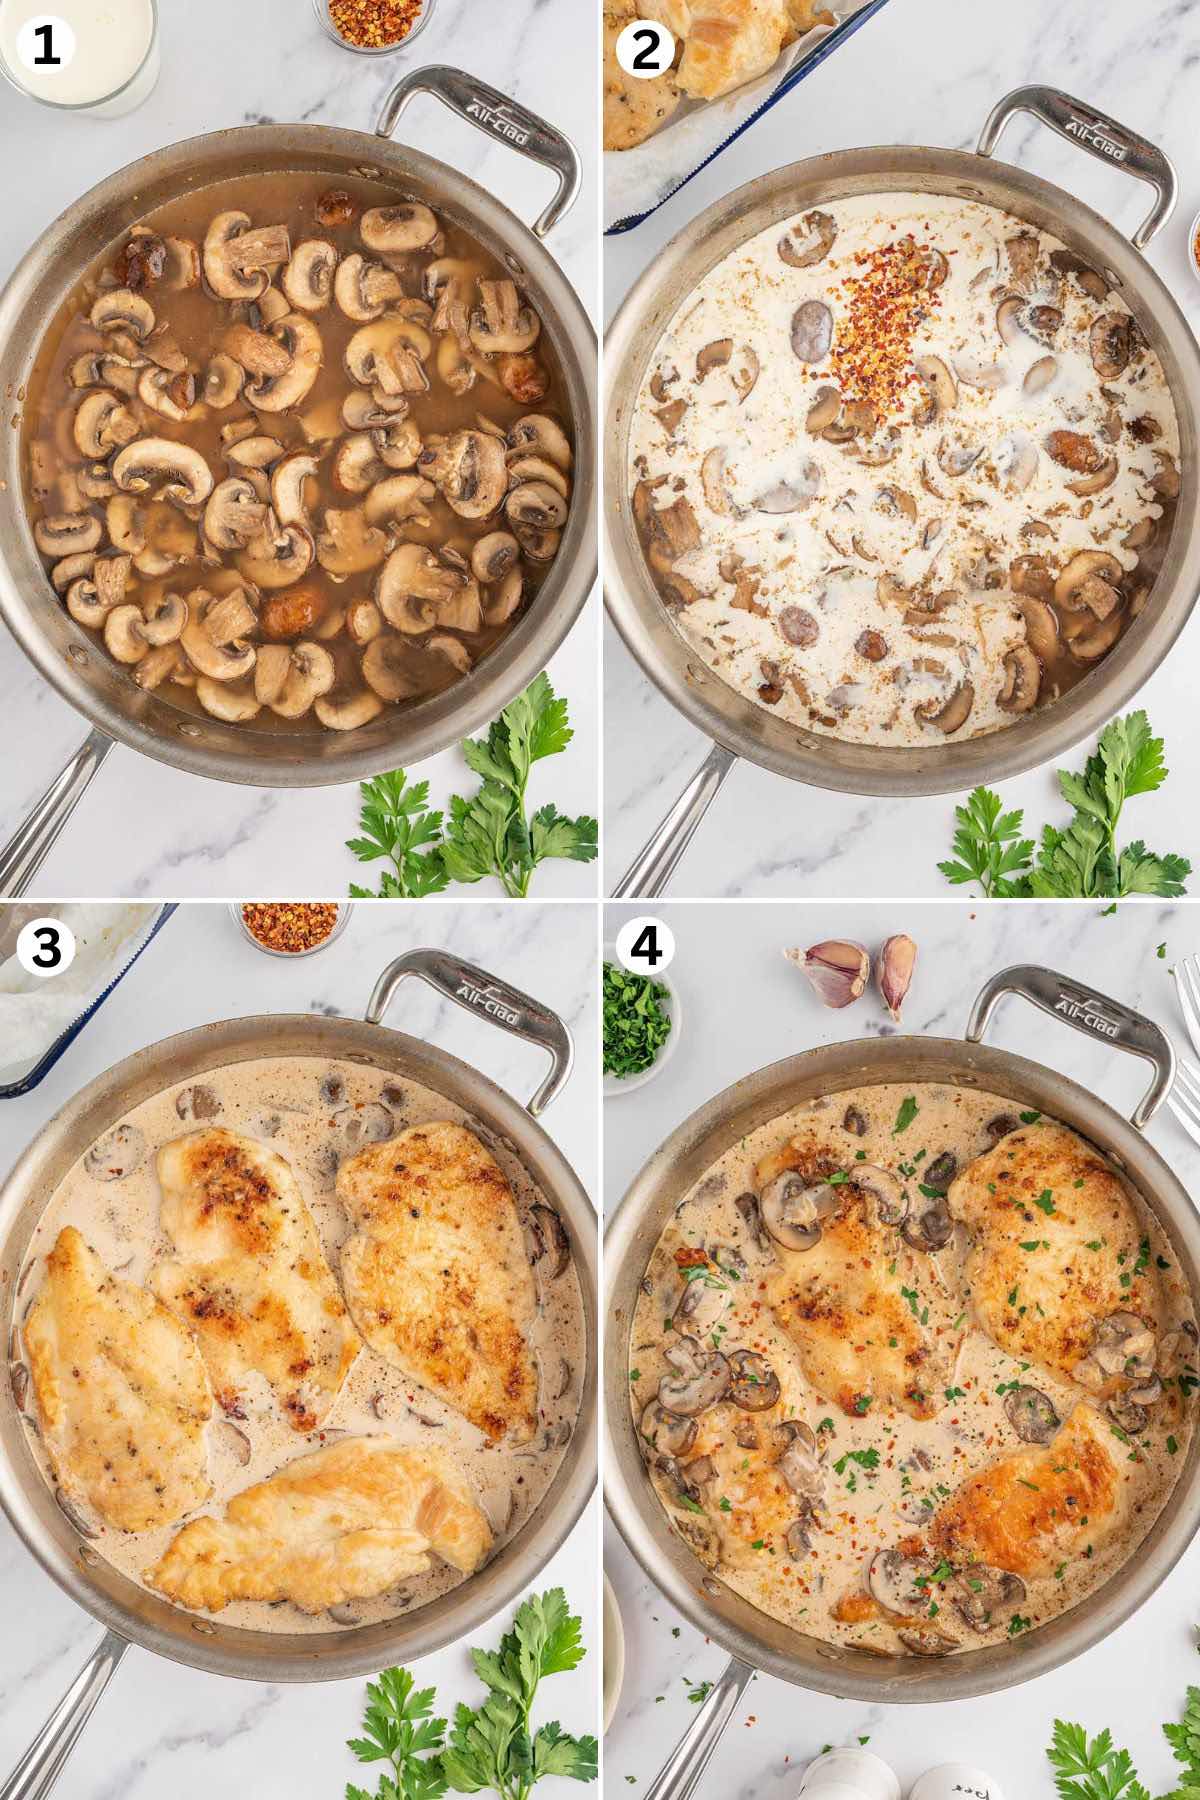 Cook the mushrooms. Pour in the whipping cream and red pepper flakes. Add the cooked chicken into the skillet. Garnish with chopped parsley.